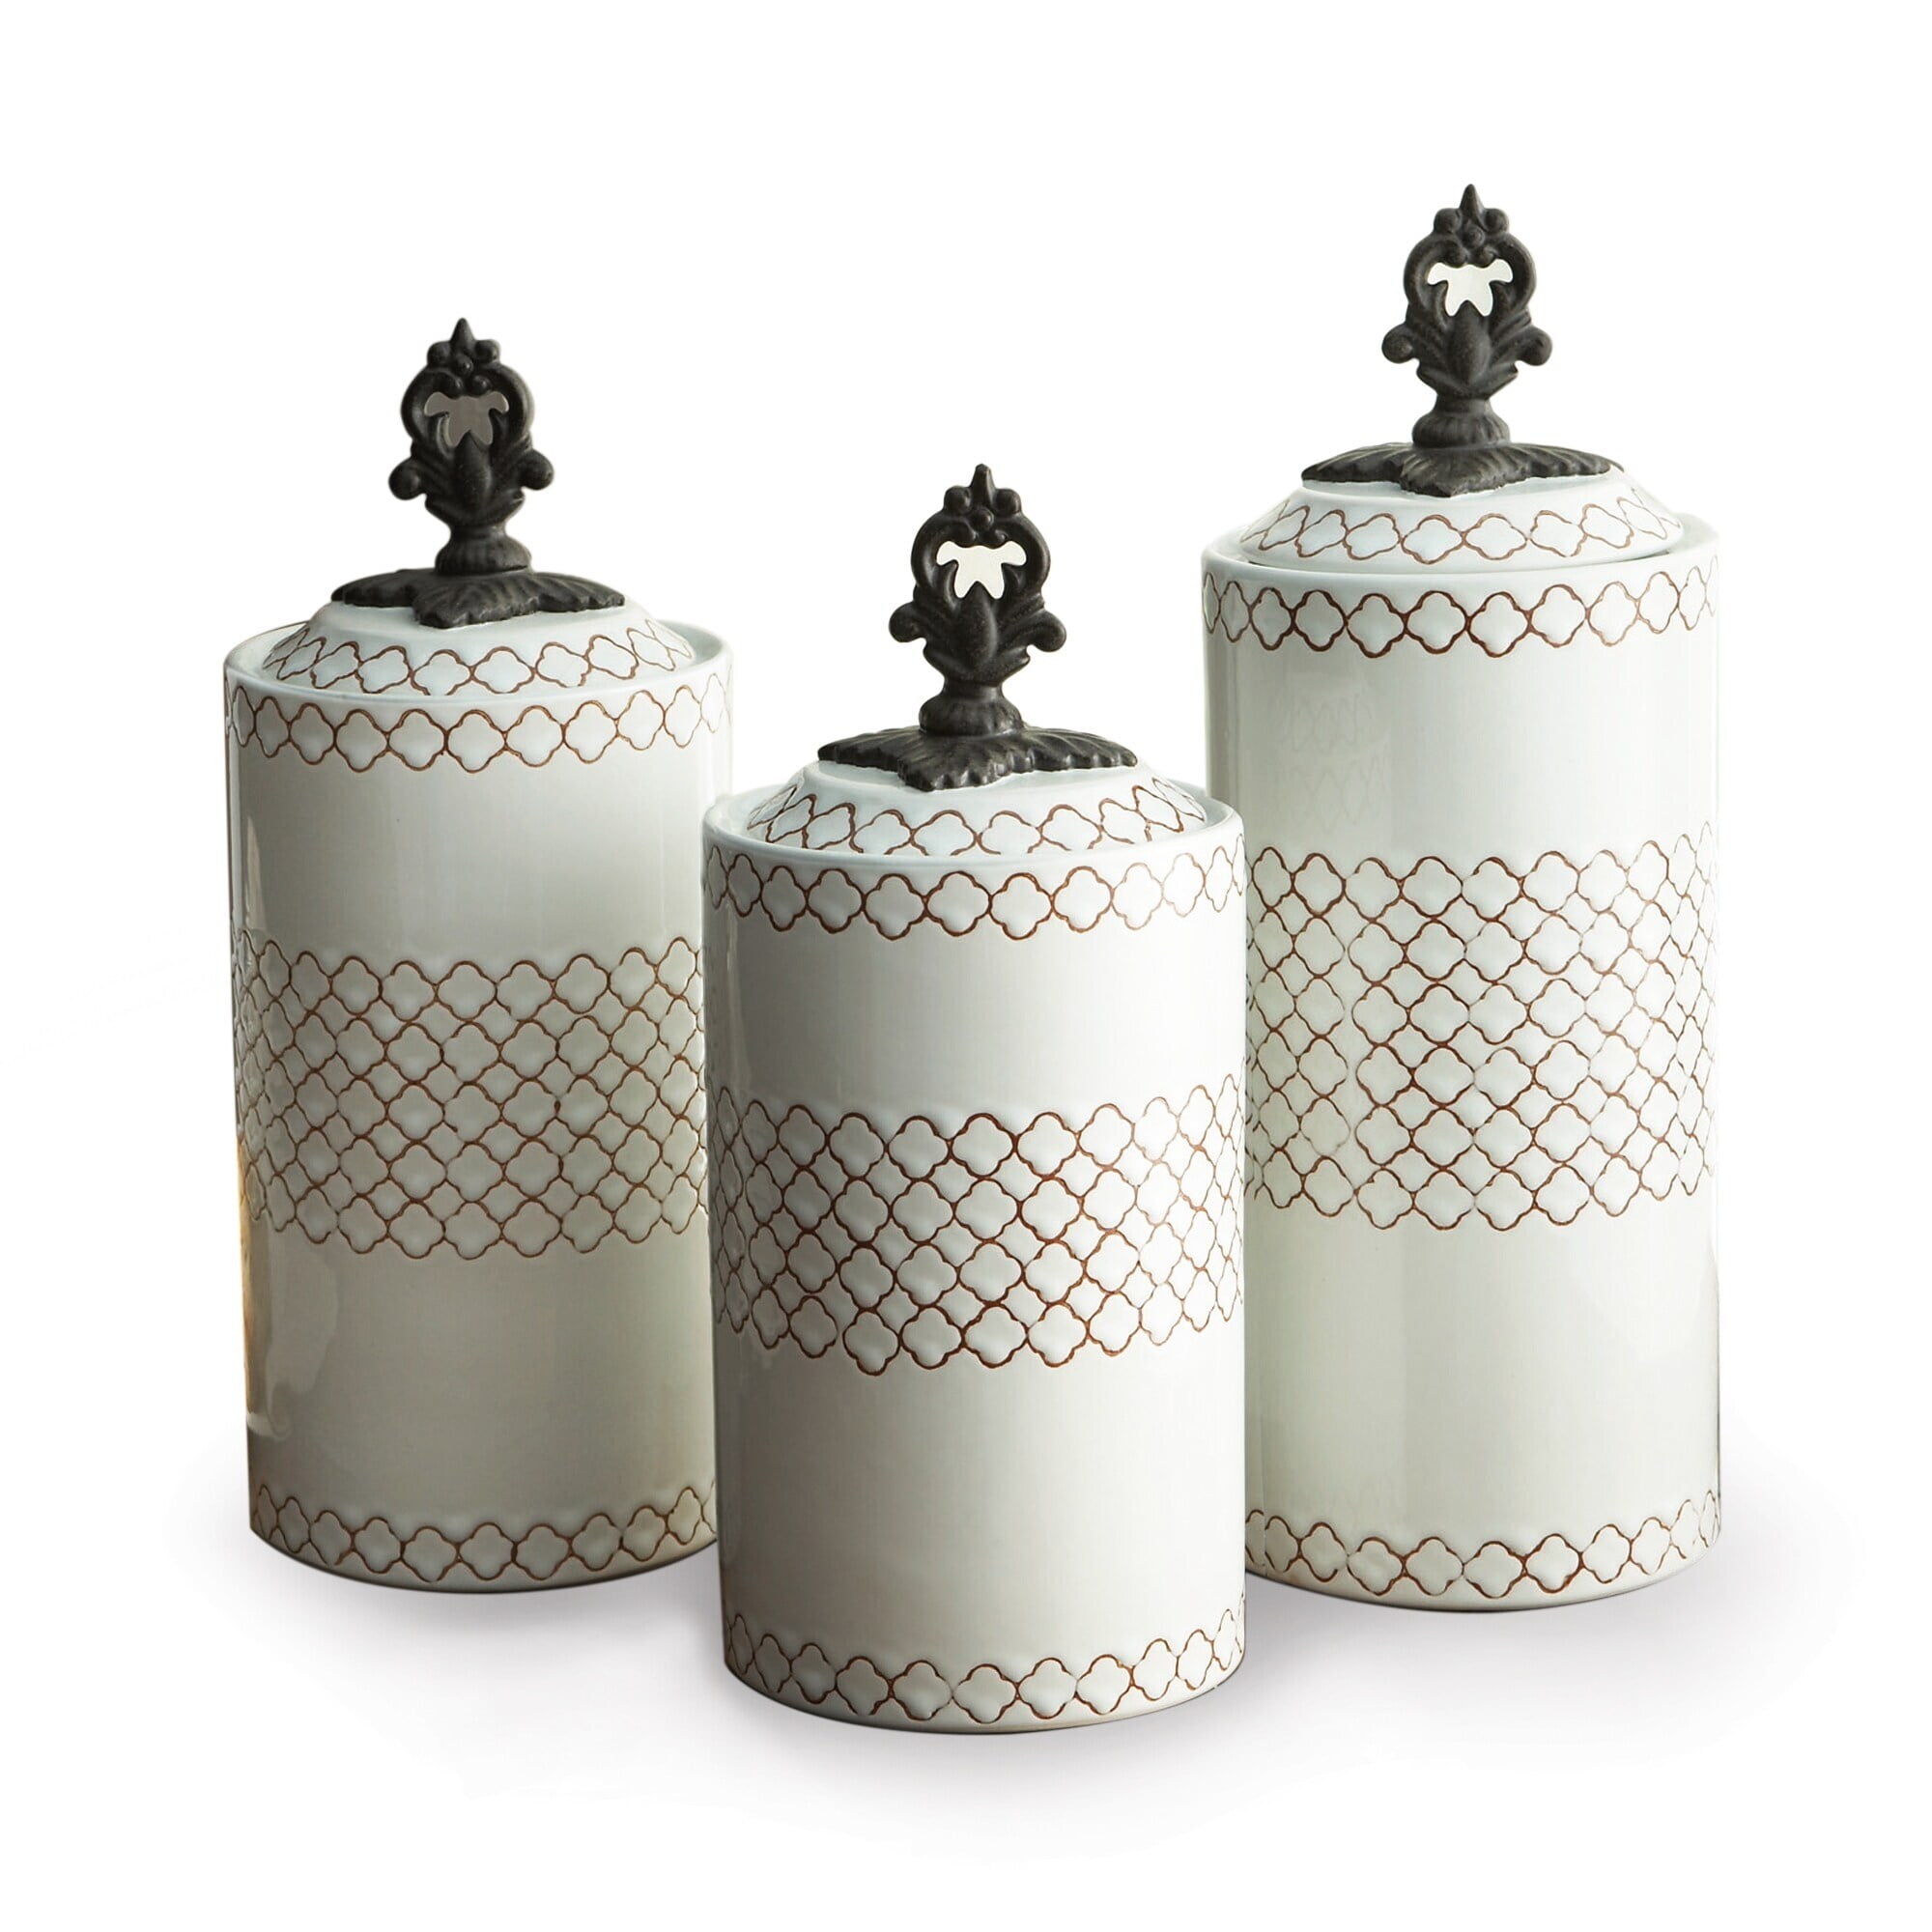 DAYYET Canisters Sets for the Kitchen, Airtight Kitchen Canisters